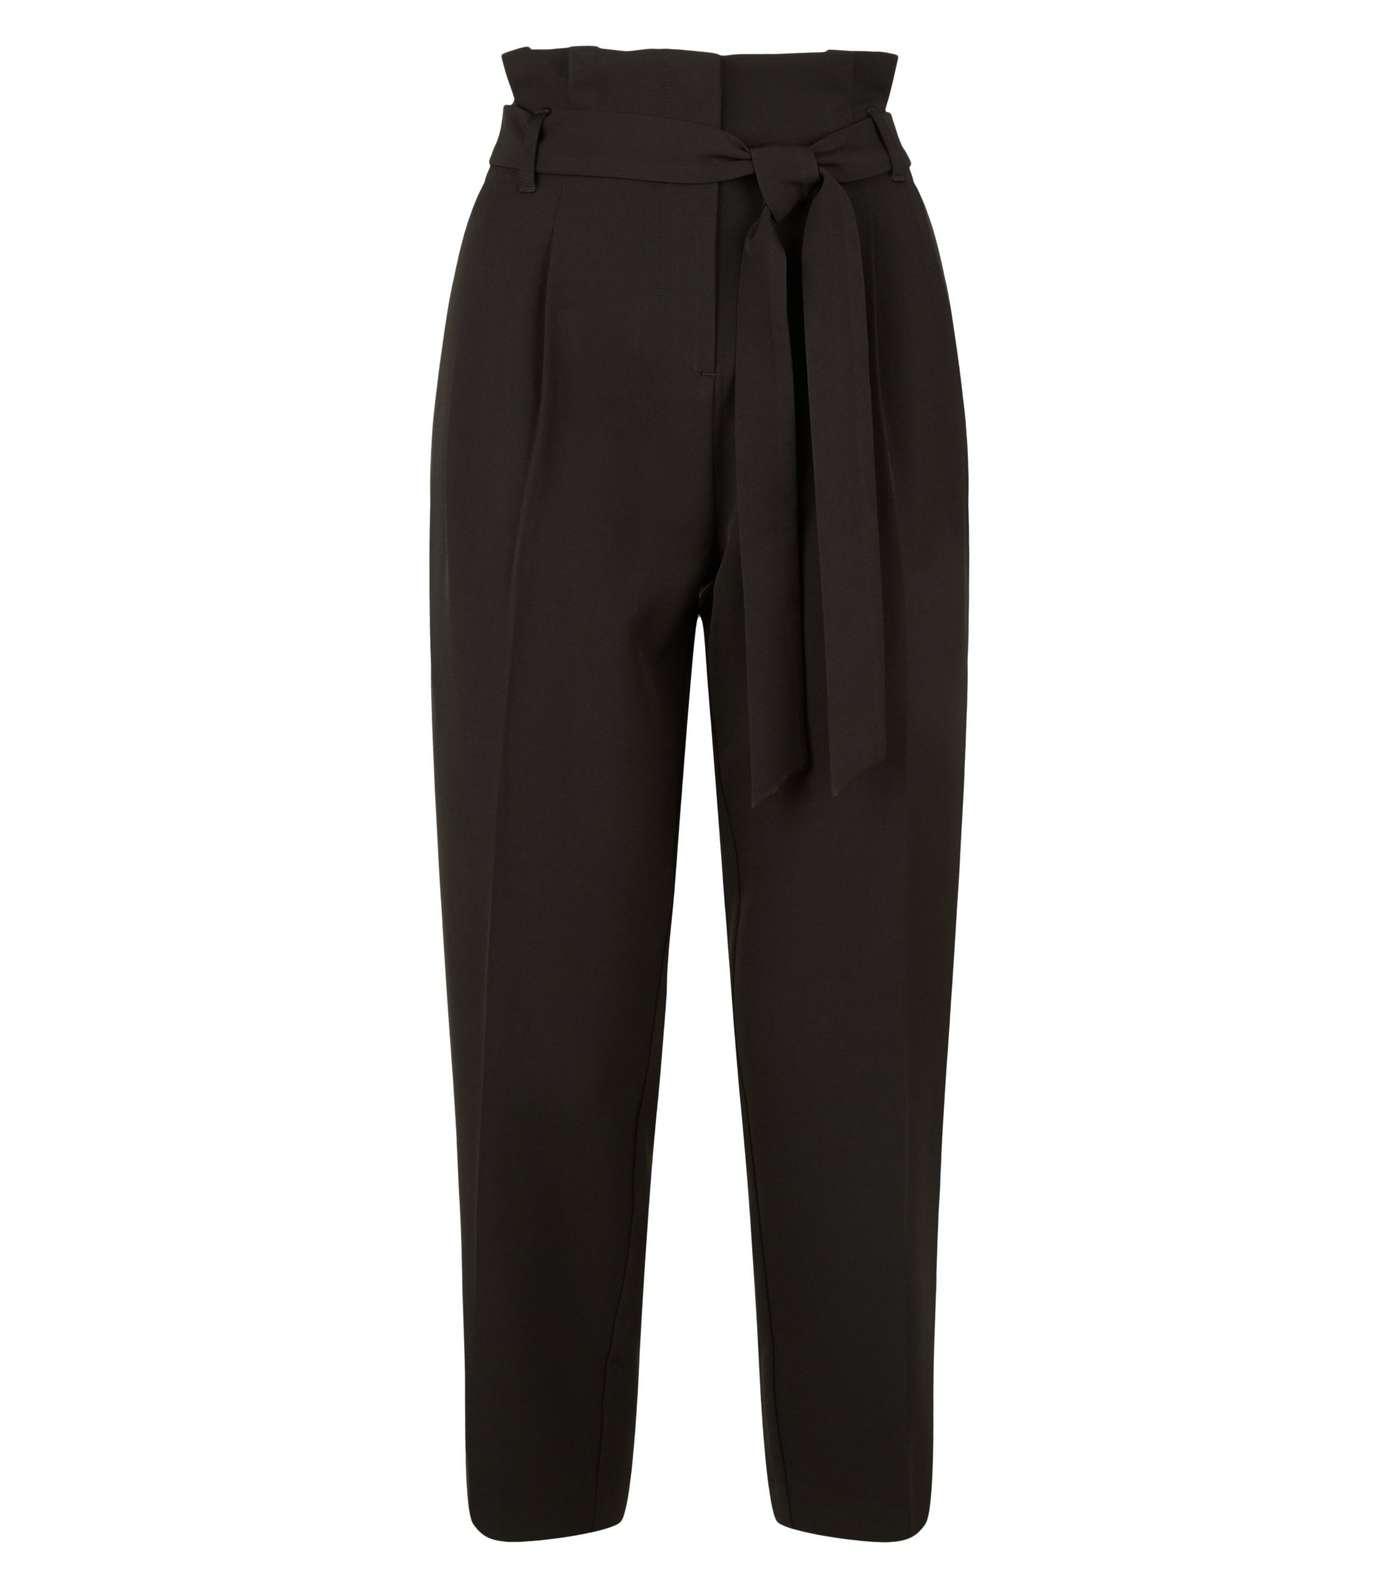 Petite Black Belted High Waist Trousers Image 5